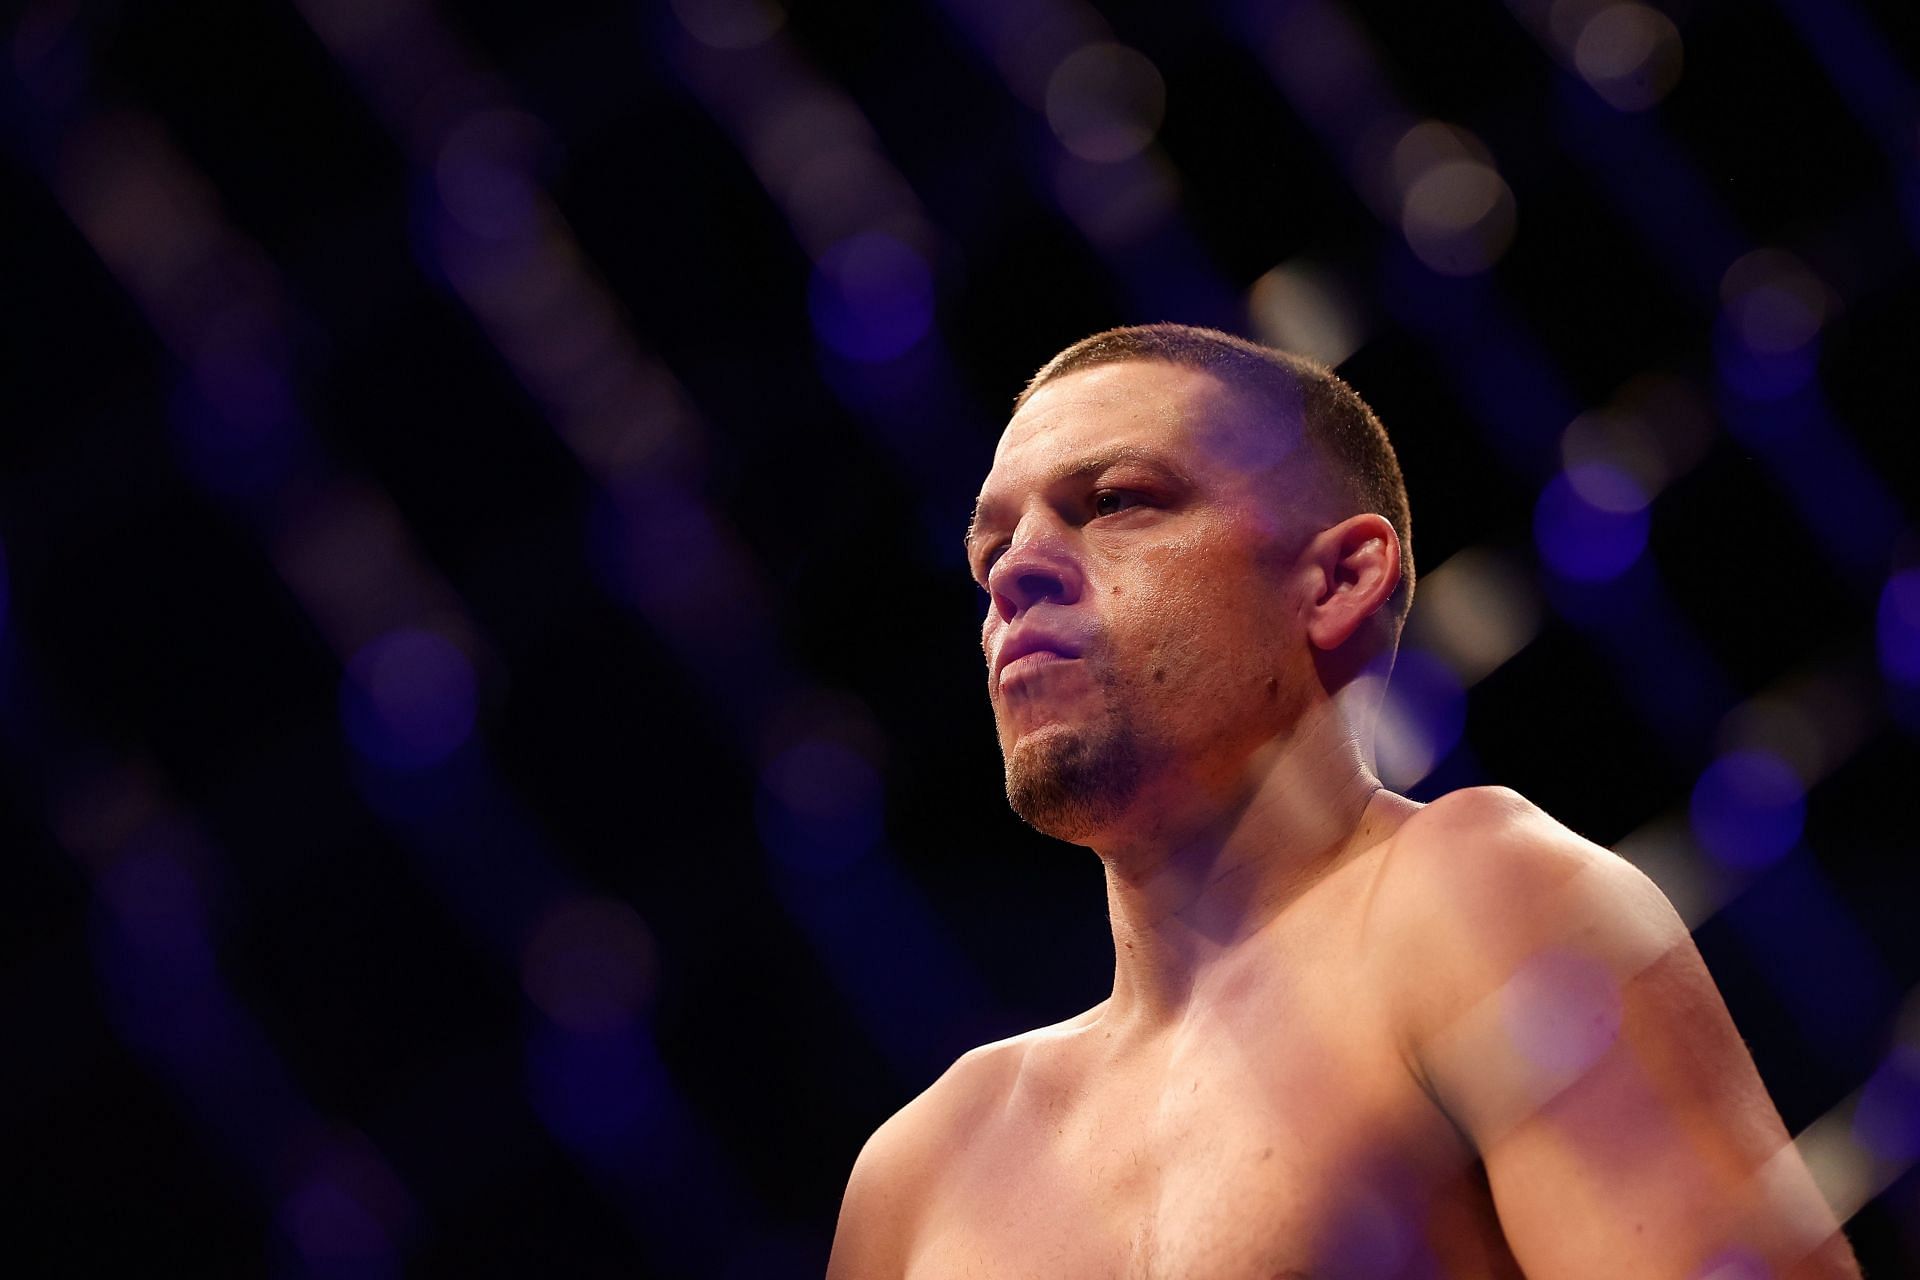 At the age of 37, Nate Diaz is probably past his prime